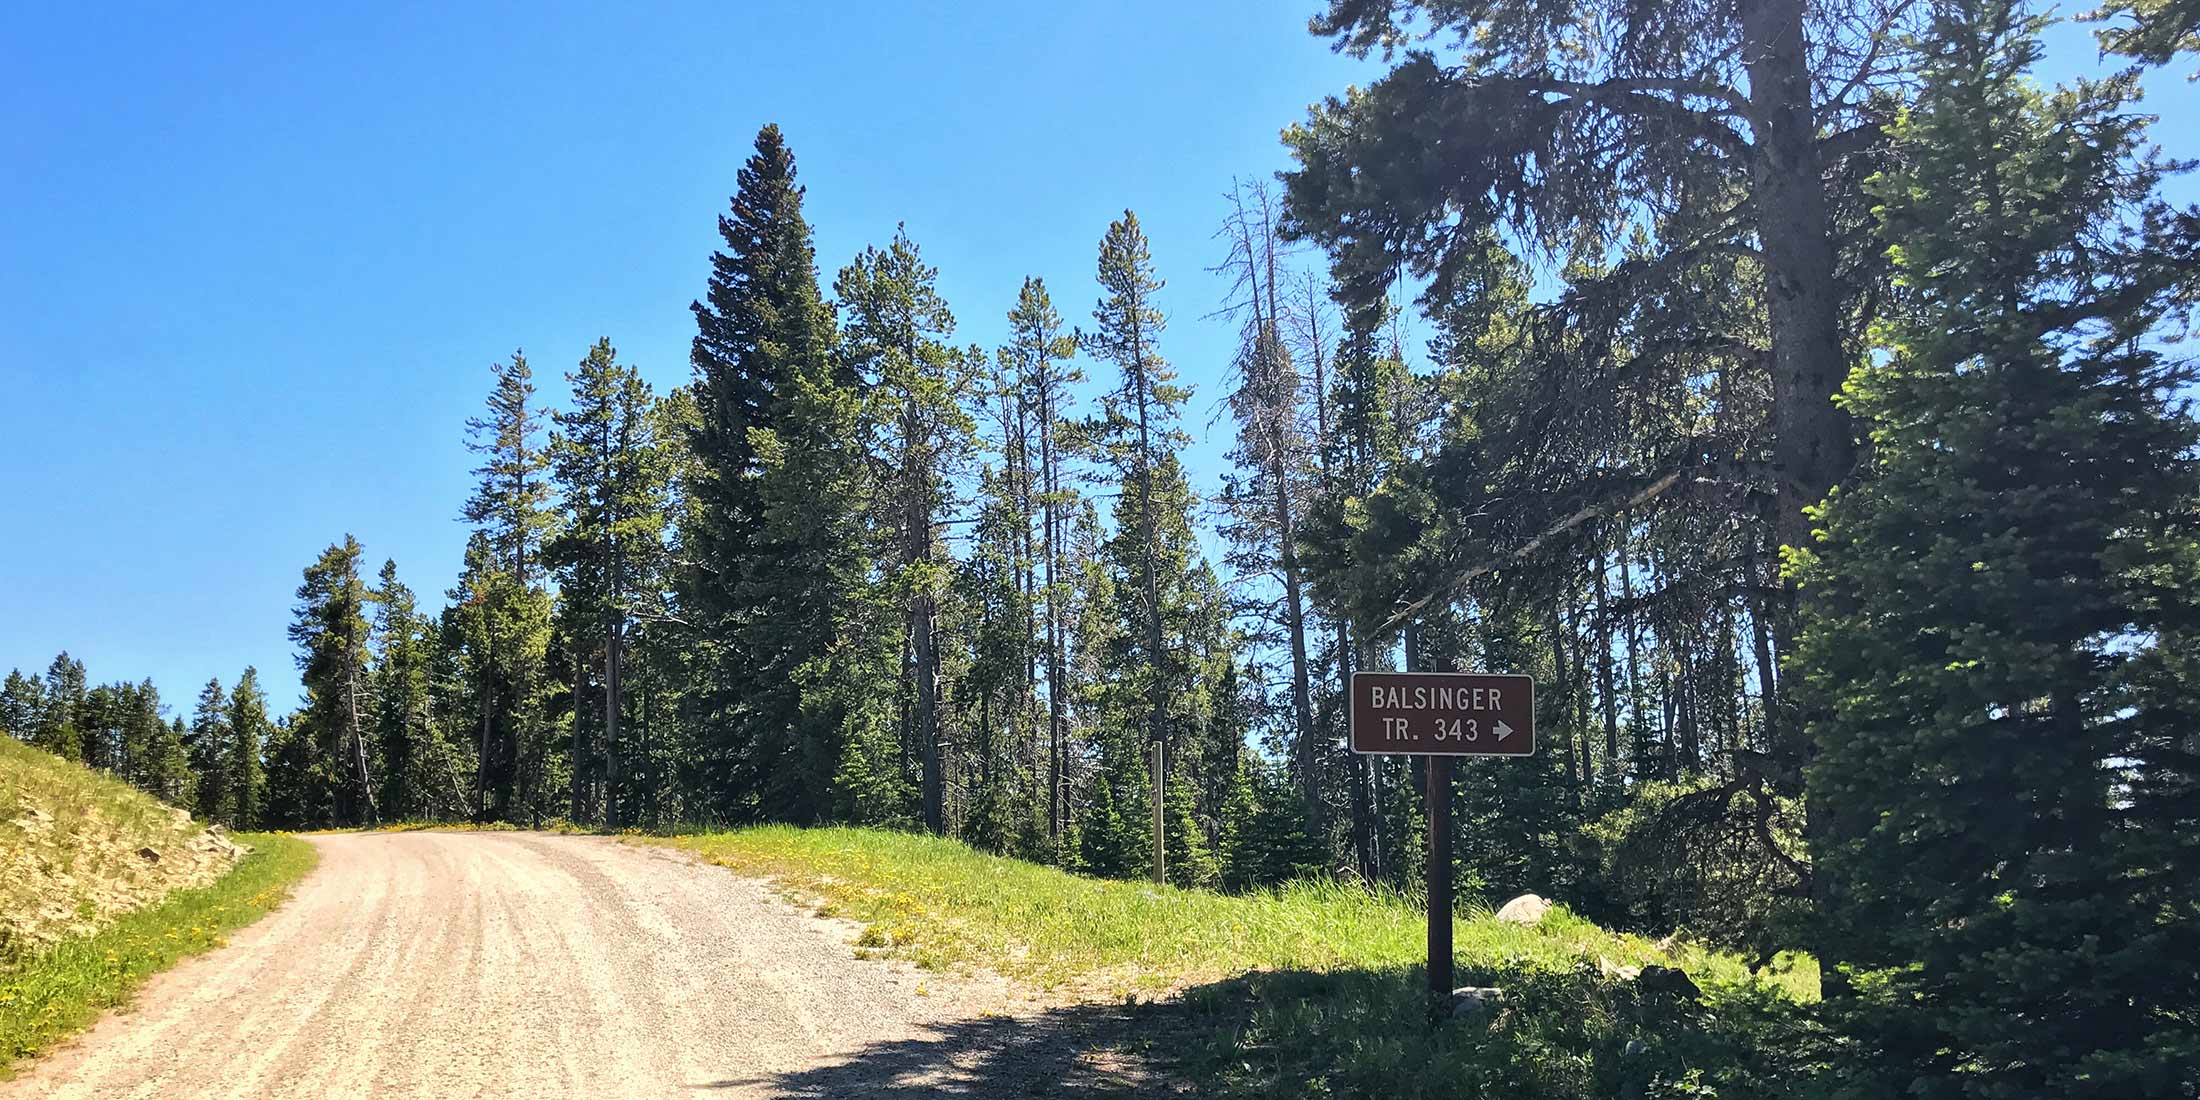 Motorcycle, Horseback trails leading to Taylor Hills and Monument Peak. Located 16.5 miles from Highway 89 on Divide Road in the Little Belt Mountains. 